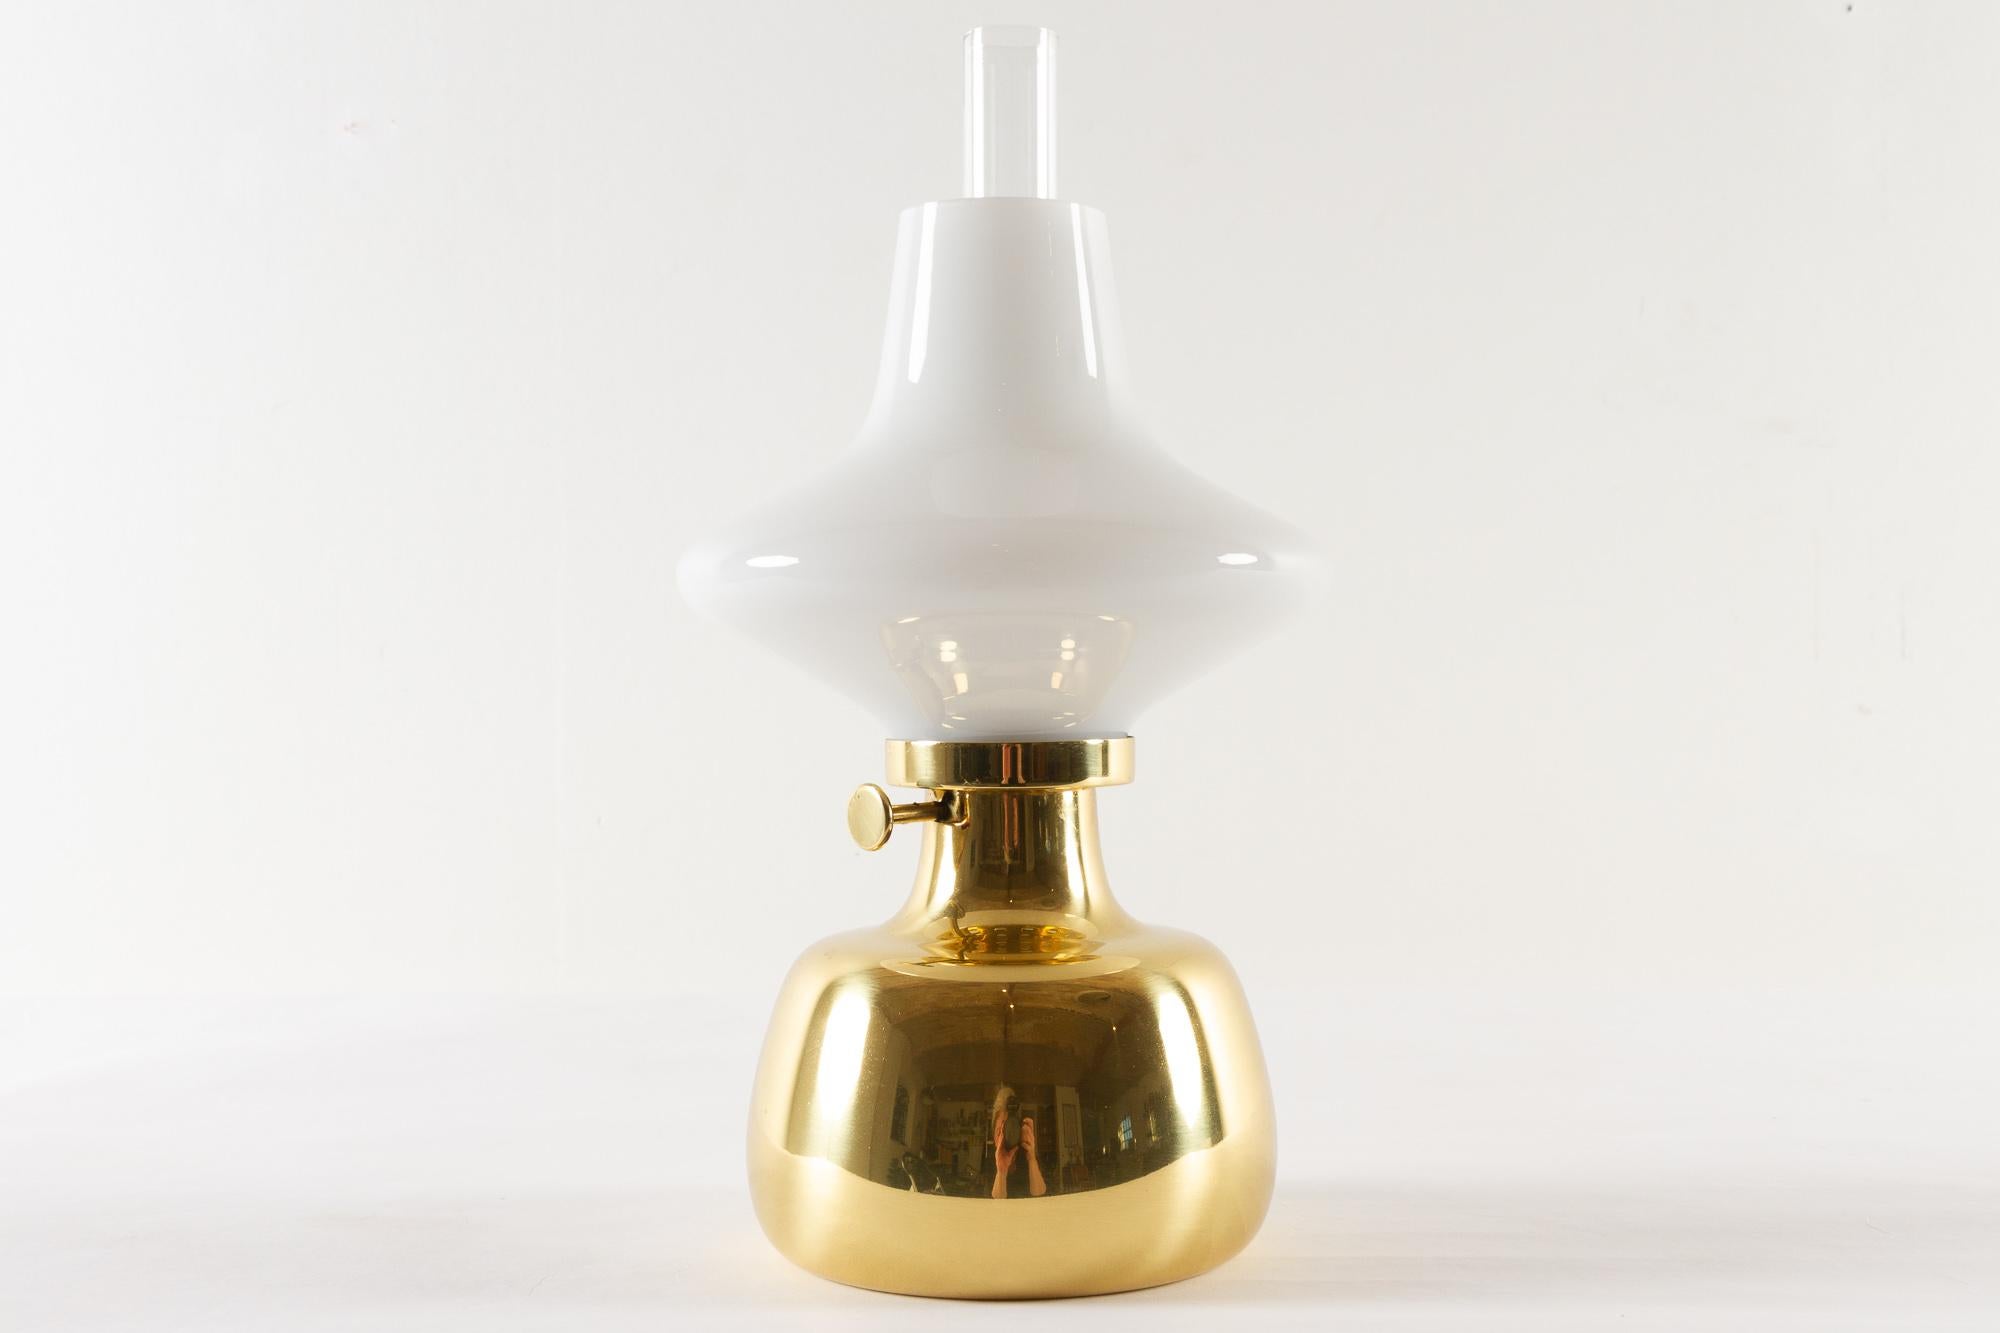 Petronella lamp by Henning Koppel for Louis Poulsen, 1960s.

Danish oil lamp in brass and white opaline glass. Designed by Danish designer Henning Koppel in 1961. The lamp body was handmade by Louis Poulsen in Denmark. The glass parts were made by